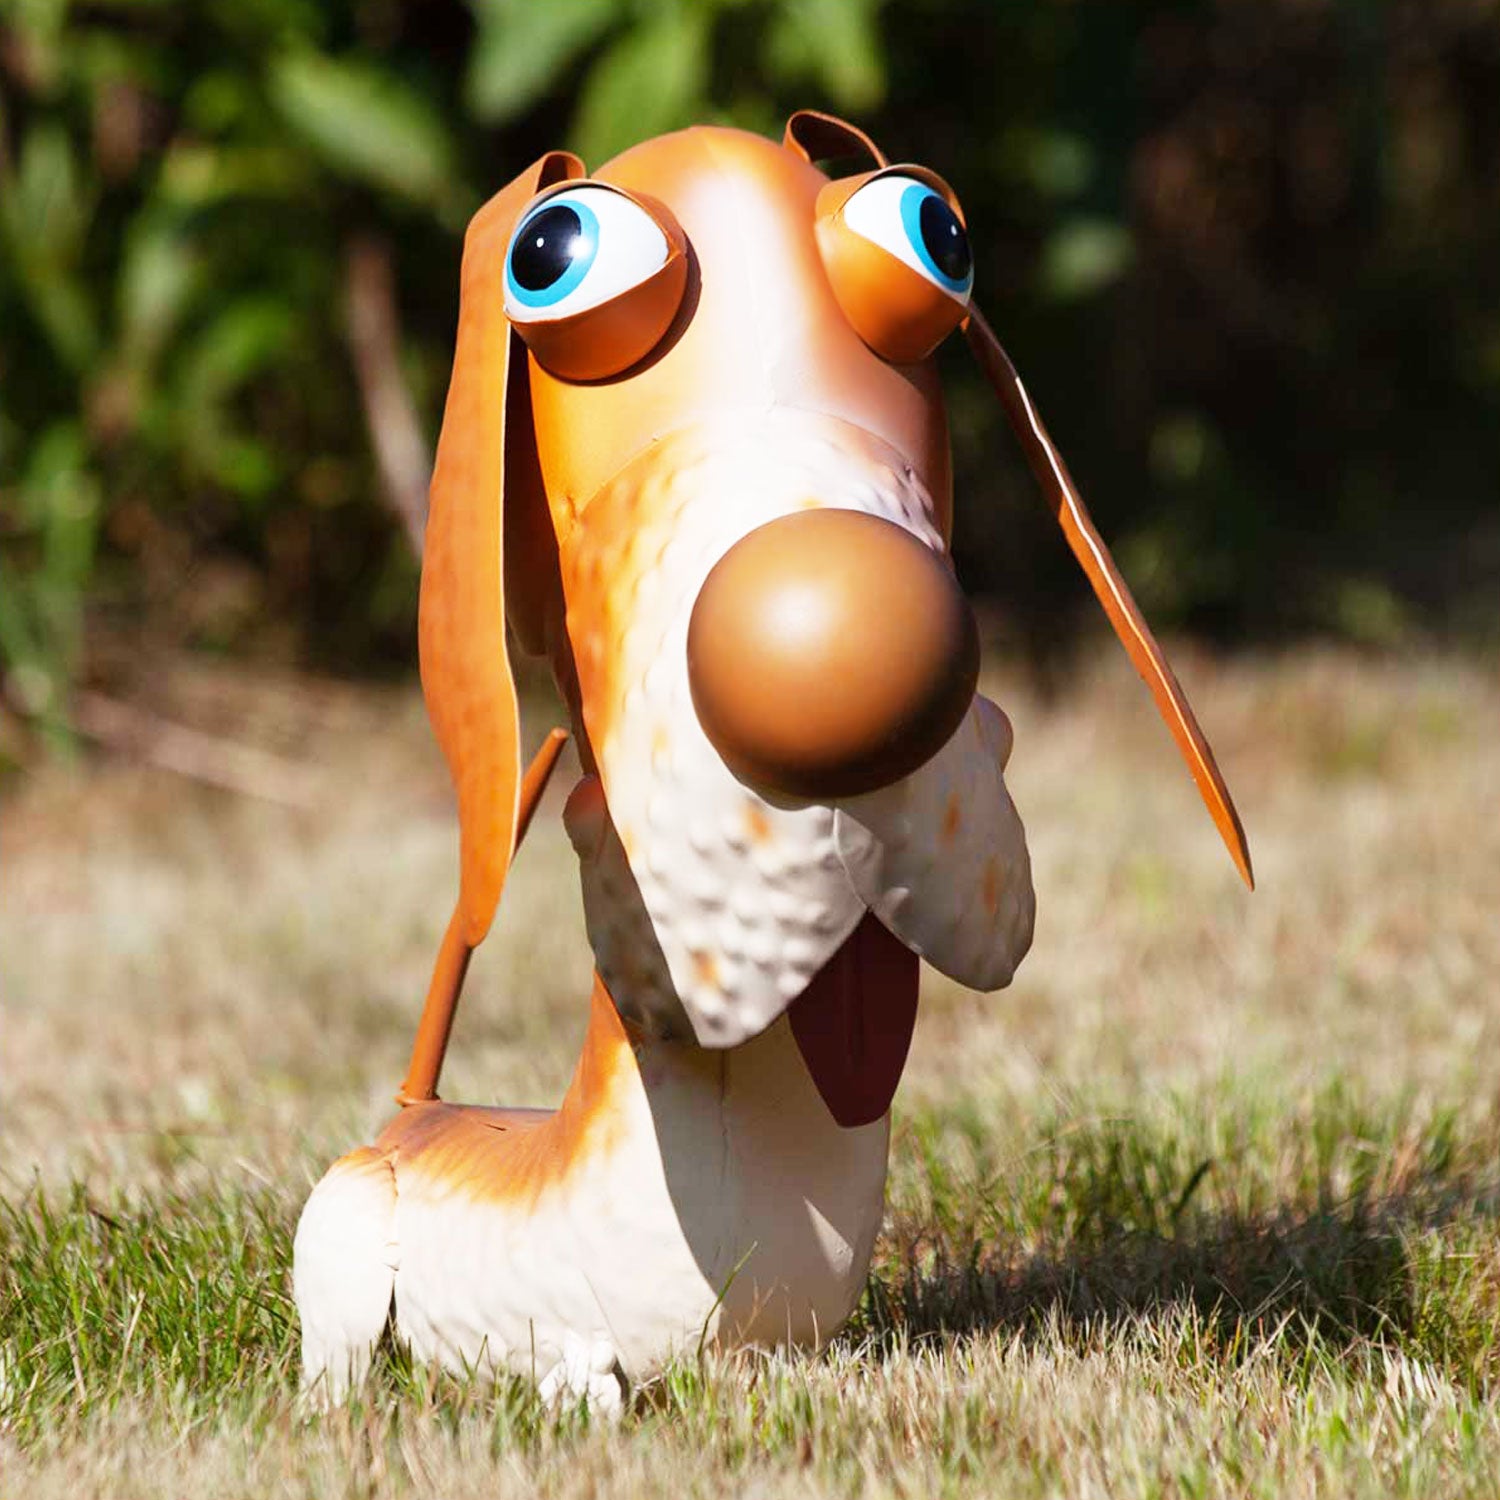 Dog Lover Gifts available at Dog Krazy Gifts – Bobble Buddies Basset, available at www.dogkrazygifts.co.uk